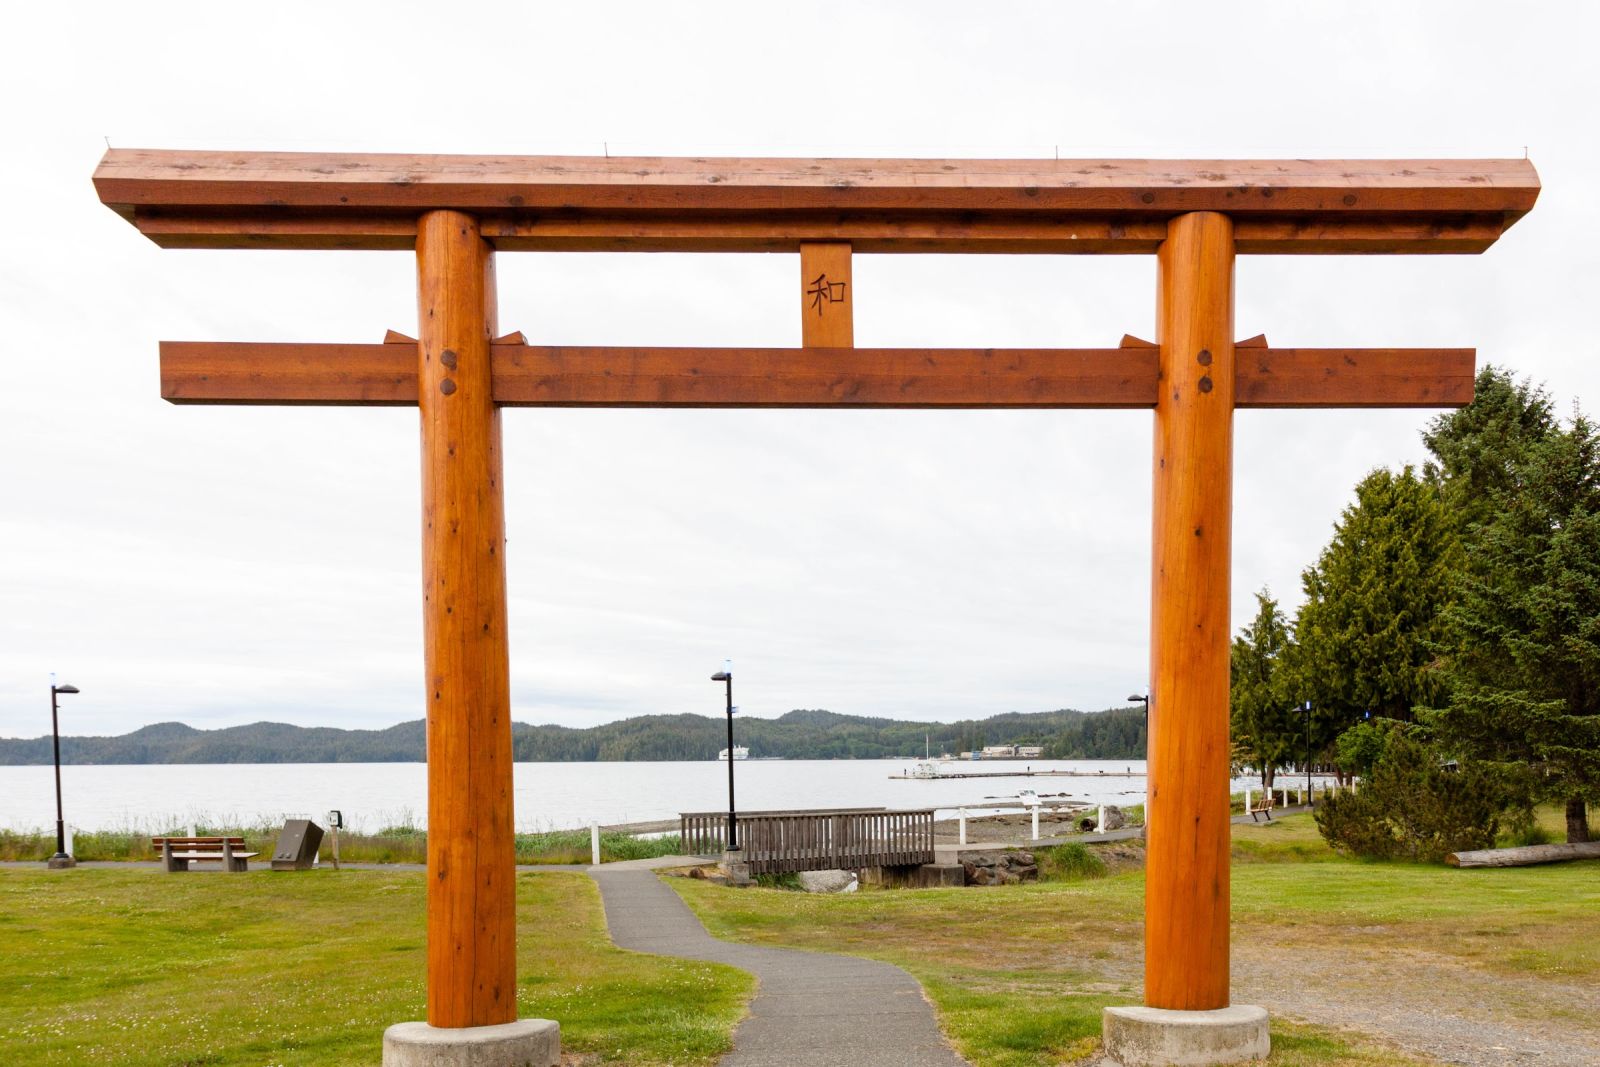 Port Hardy is twinned with the town of Numata in Japan